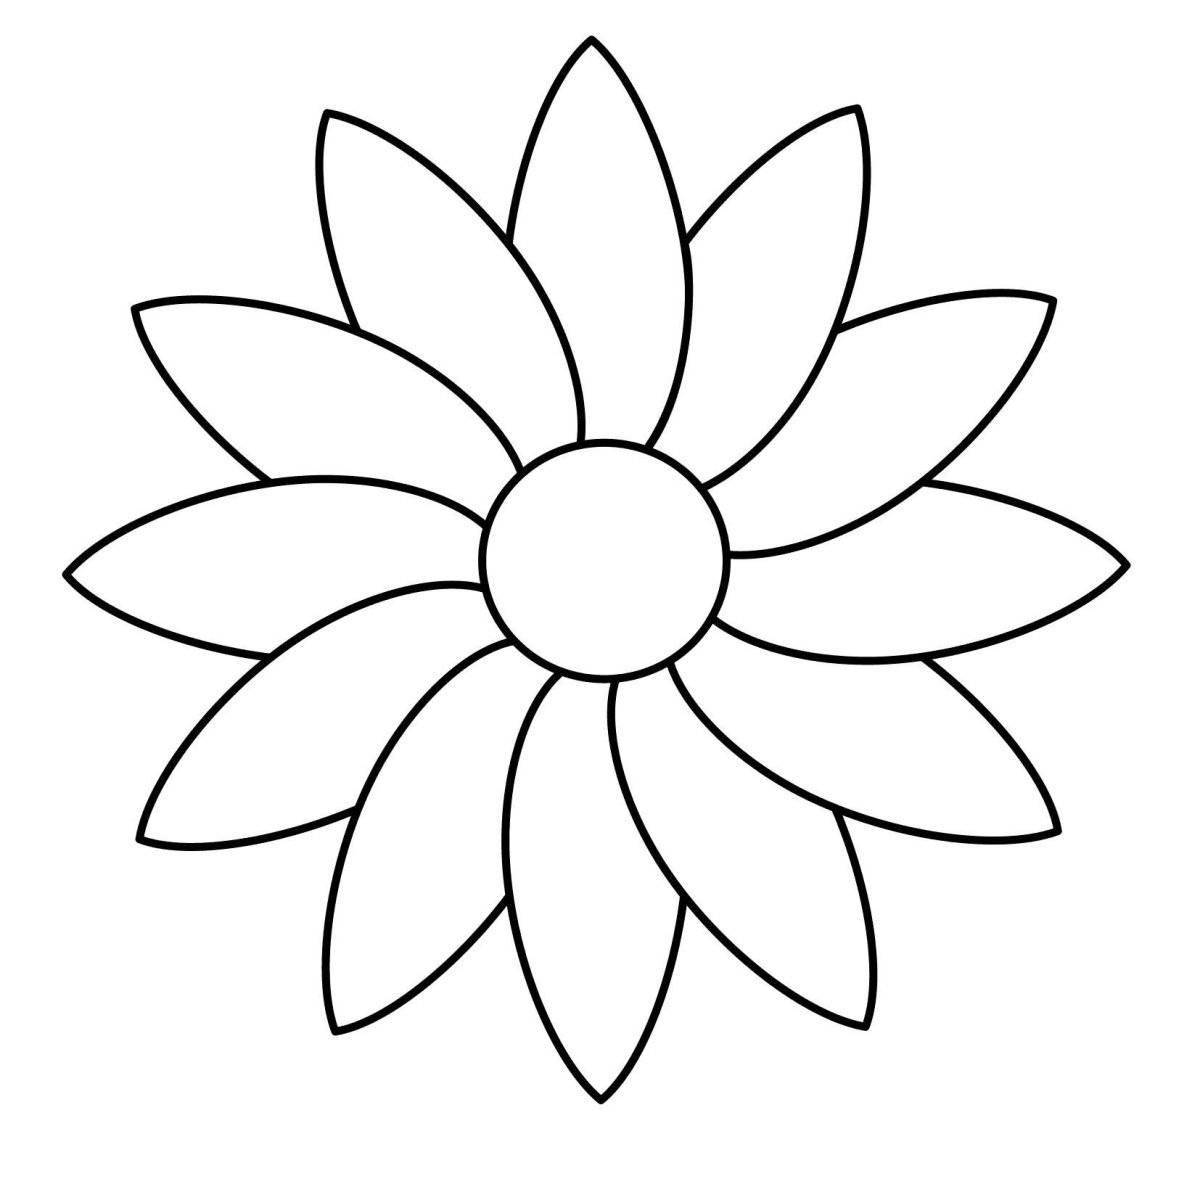 Coloring flower picture for children